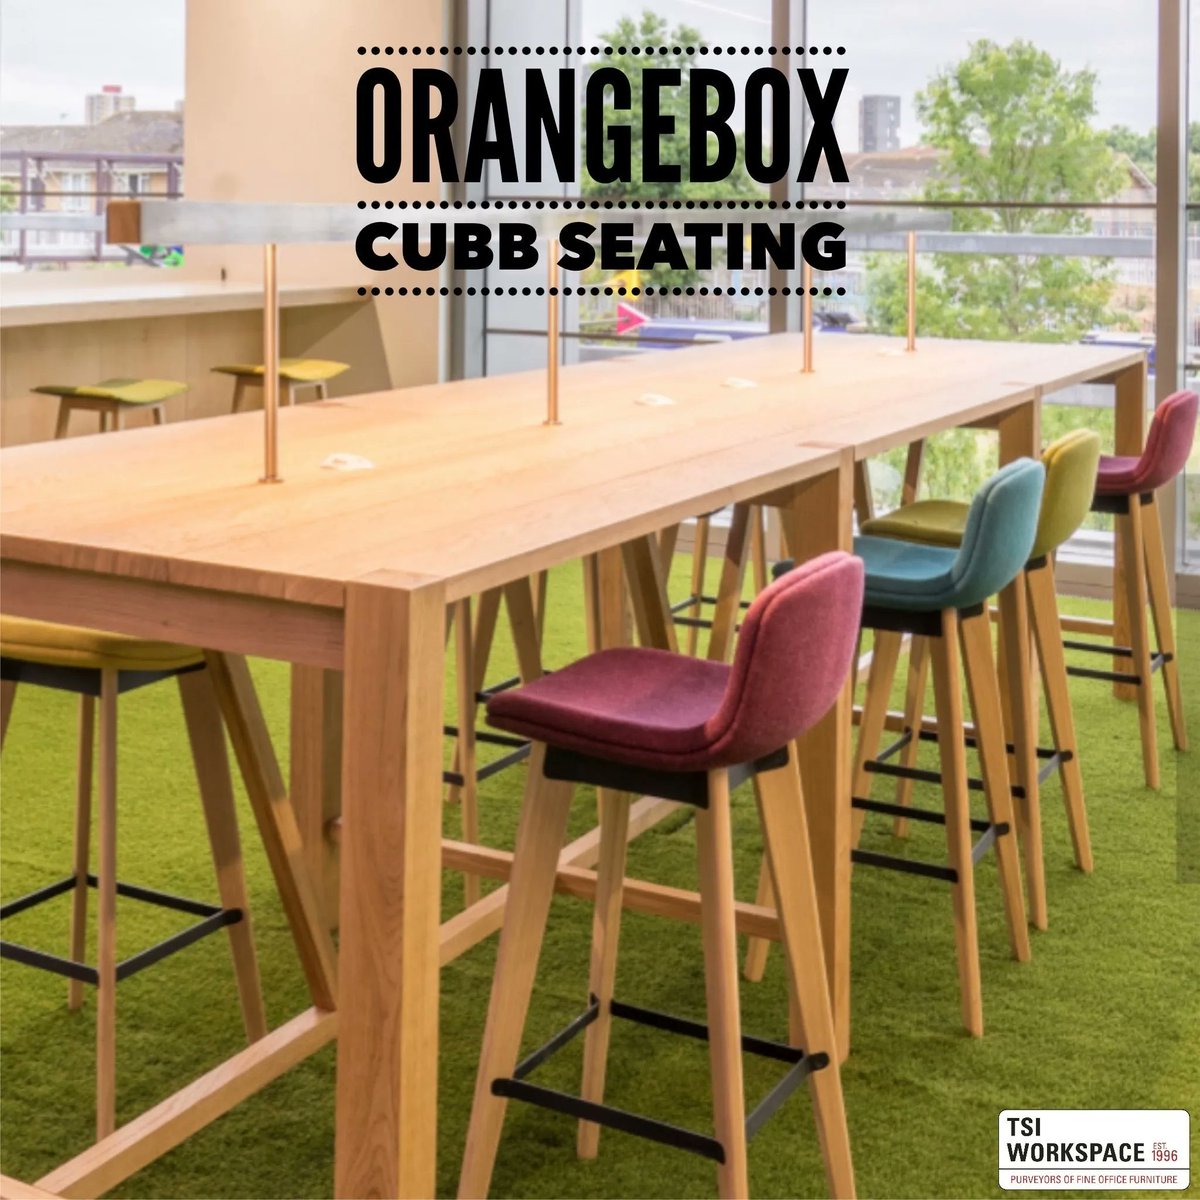 Orangebox Cubb Seating

Orangebox Cubb seating is a succinct range of chairs, stools and tables: a new synthesis of design, function, materials, attitude, manufacturing intelligence and sustainability

bit.ly/3qLXjIq

#furniture #commercialfurniture #designerfurniture